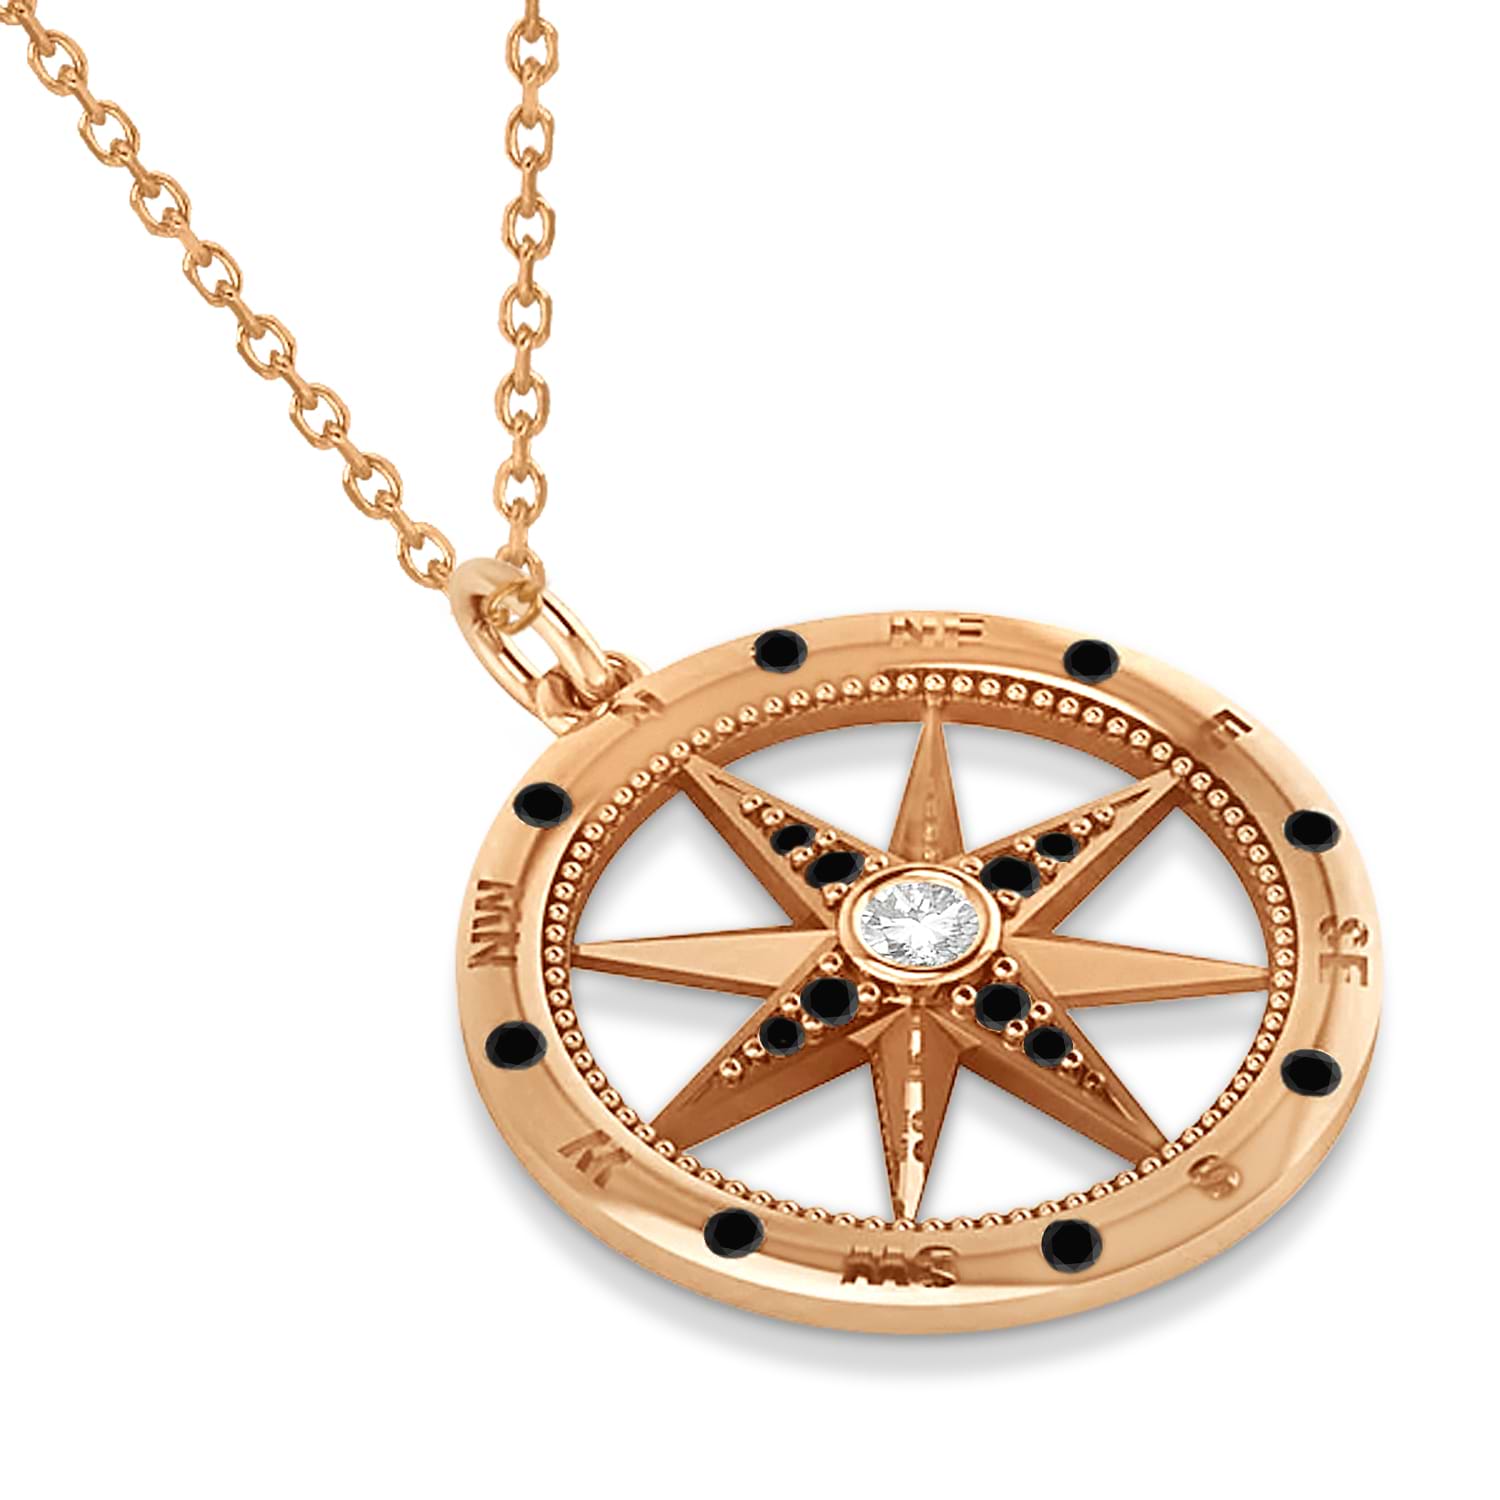 Extra Large Compass Pendant For Men Black & White Diamond Accented 14k Rose Gold (0.45ct)